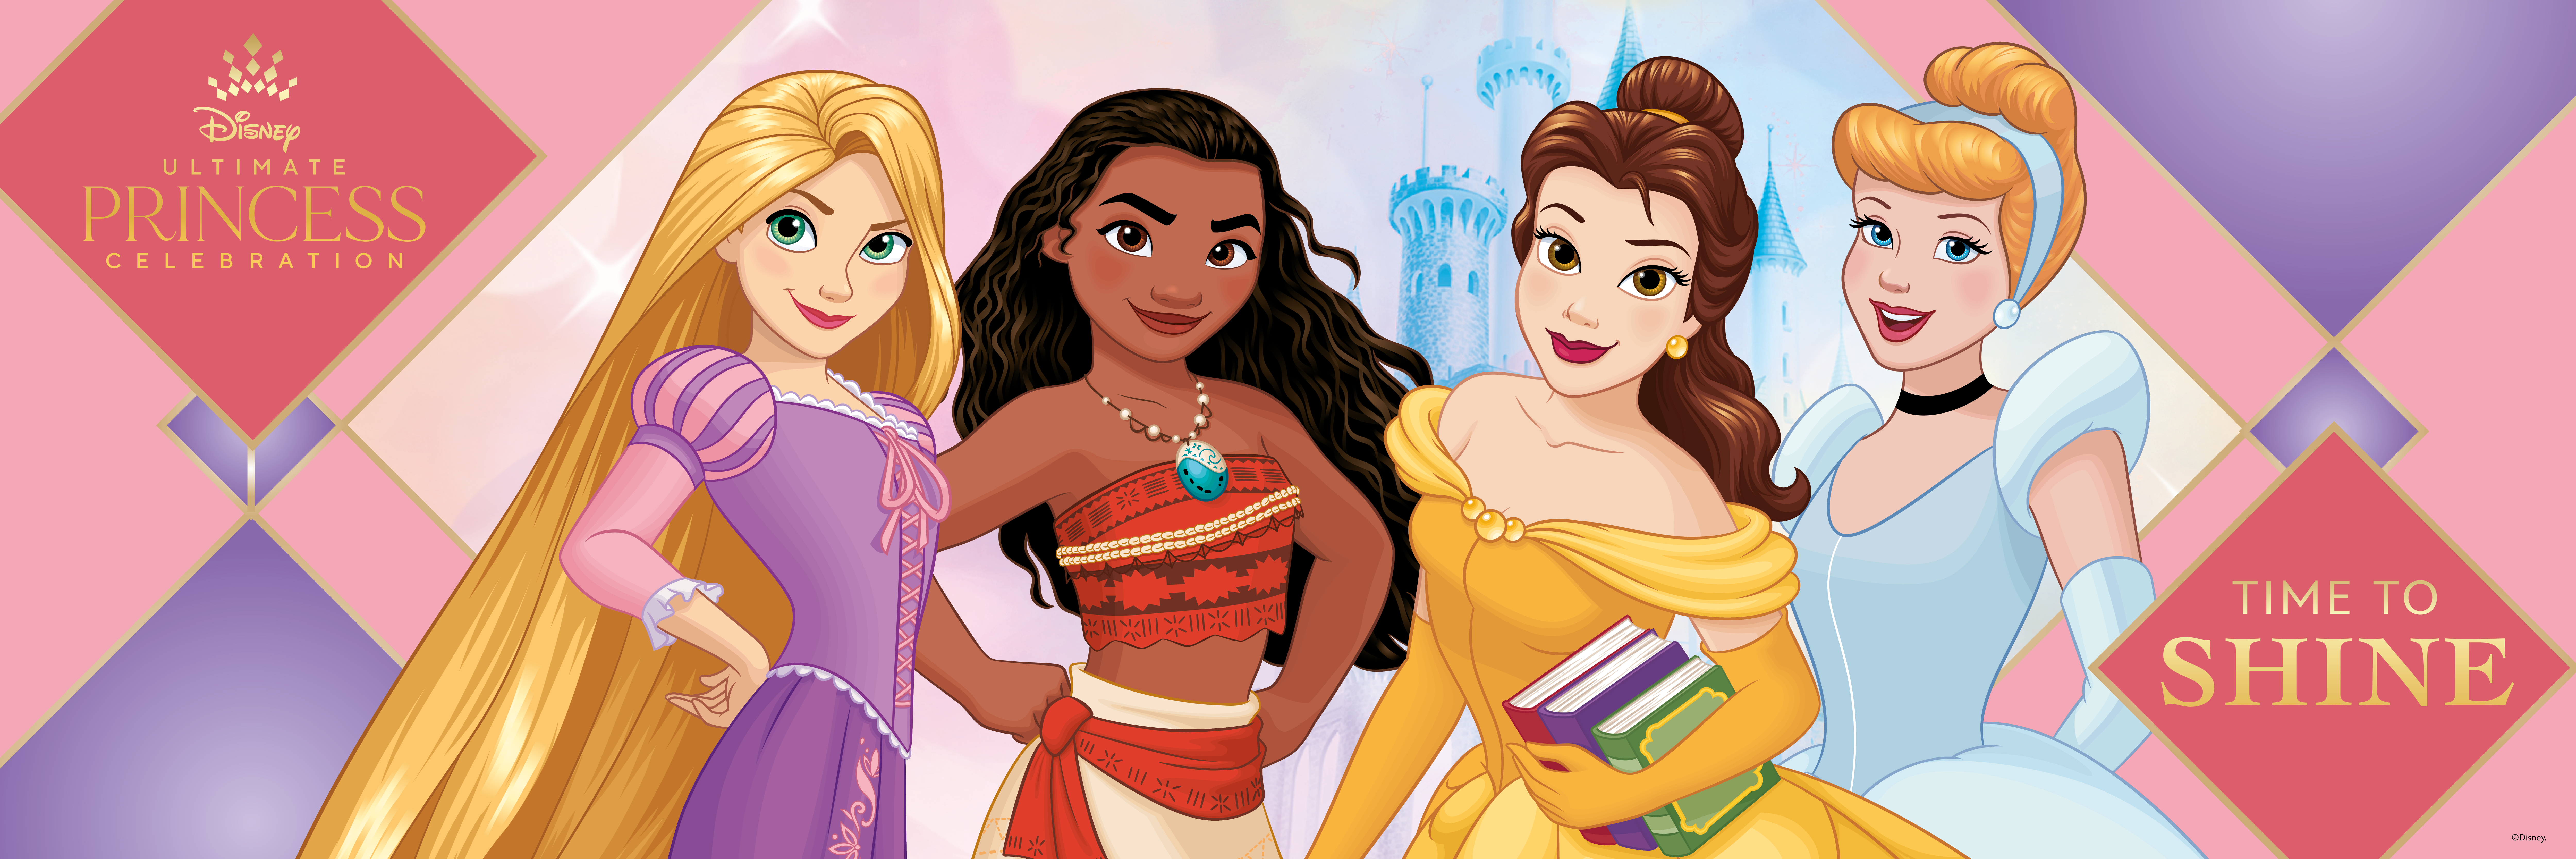 Disney Princess Cartoon Porn Full - How Disney princesses can help young girls be more confident at school |  The Independent